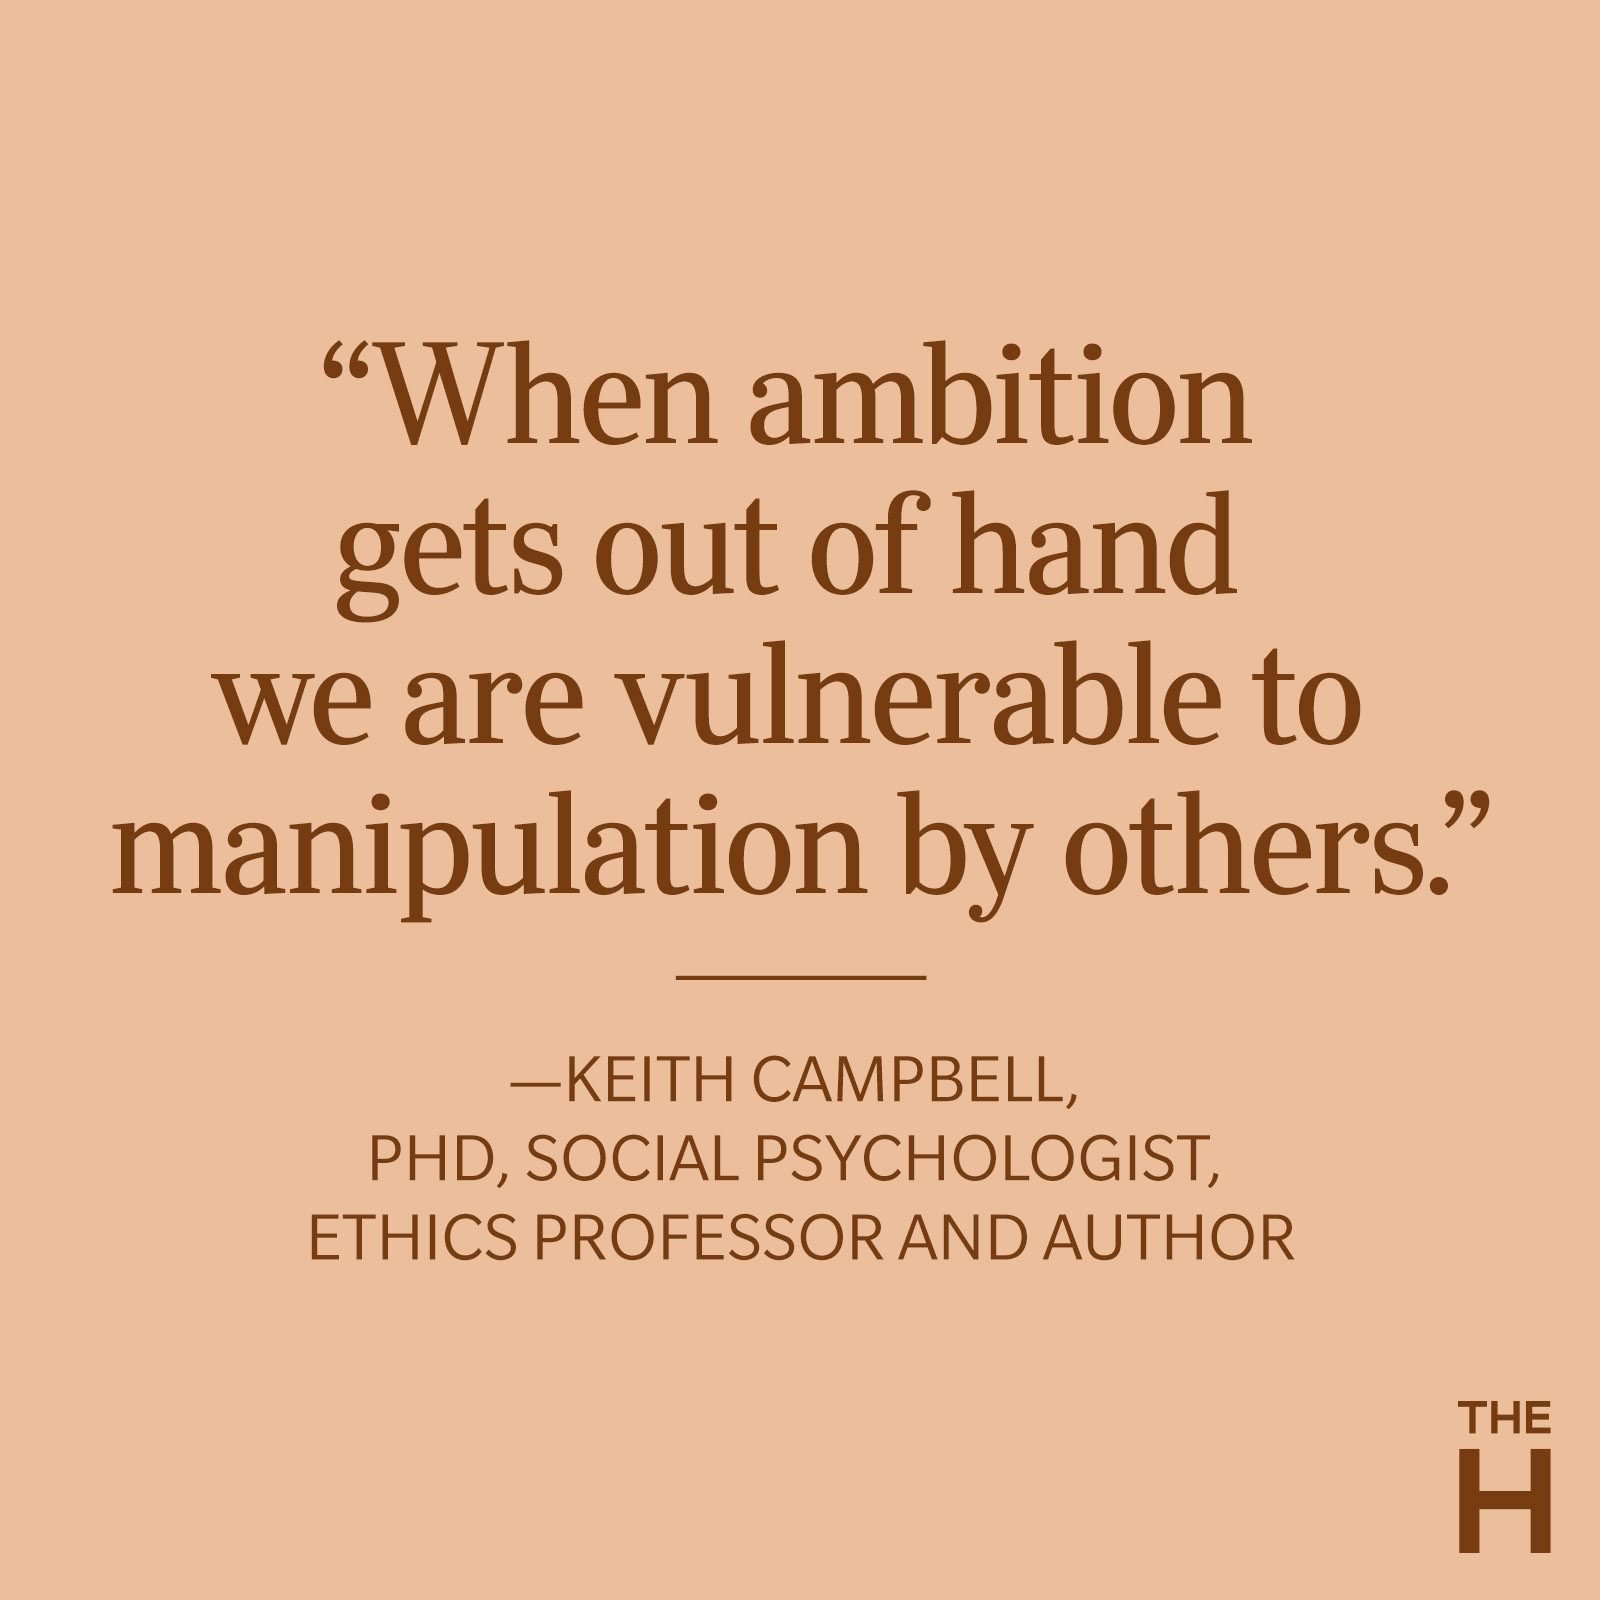 Manipulation Quotes: Experts' Words for Recognizing Controling Behavior